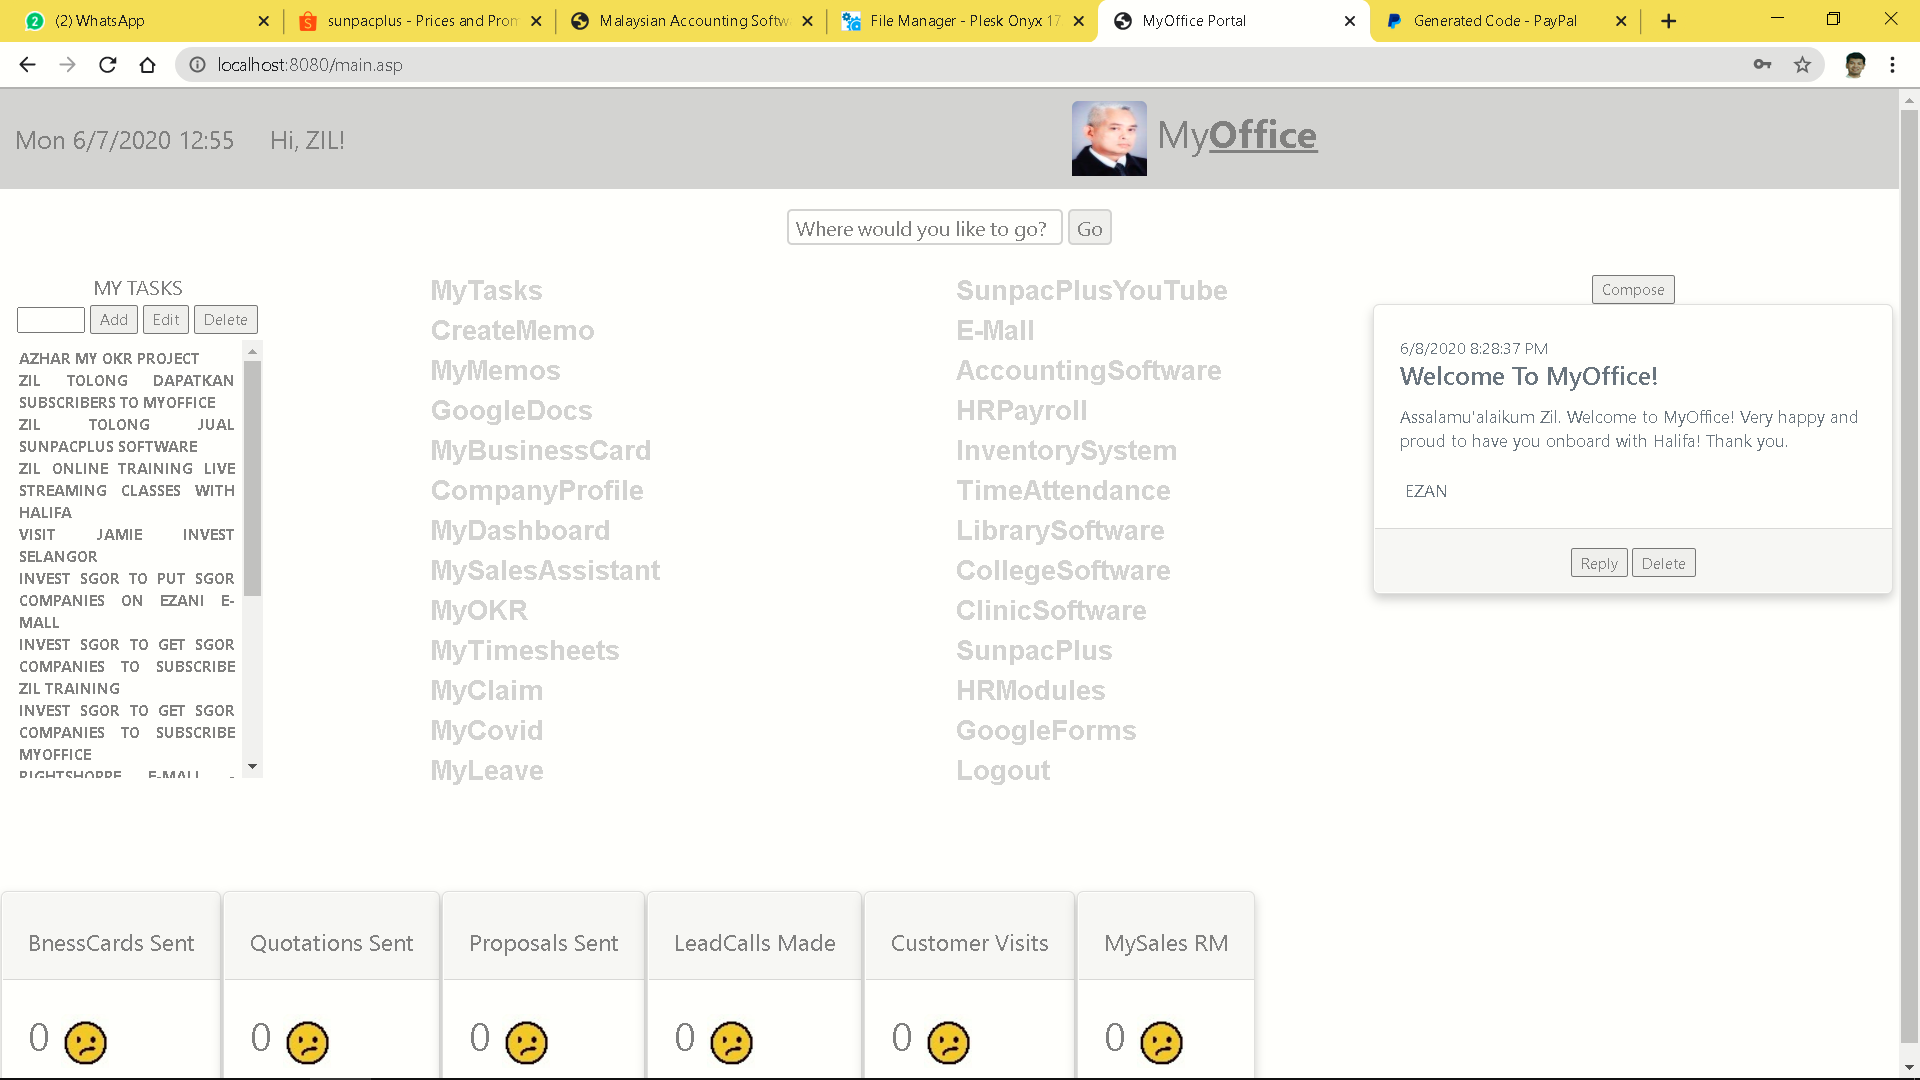 Comprehensive virtual office on the web for working from home with leave, claim, timesheet, task management!